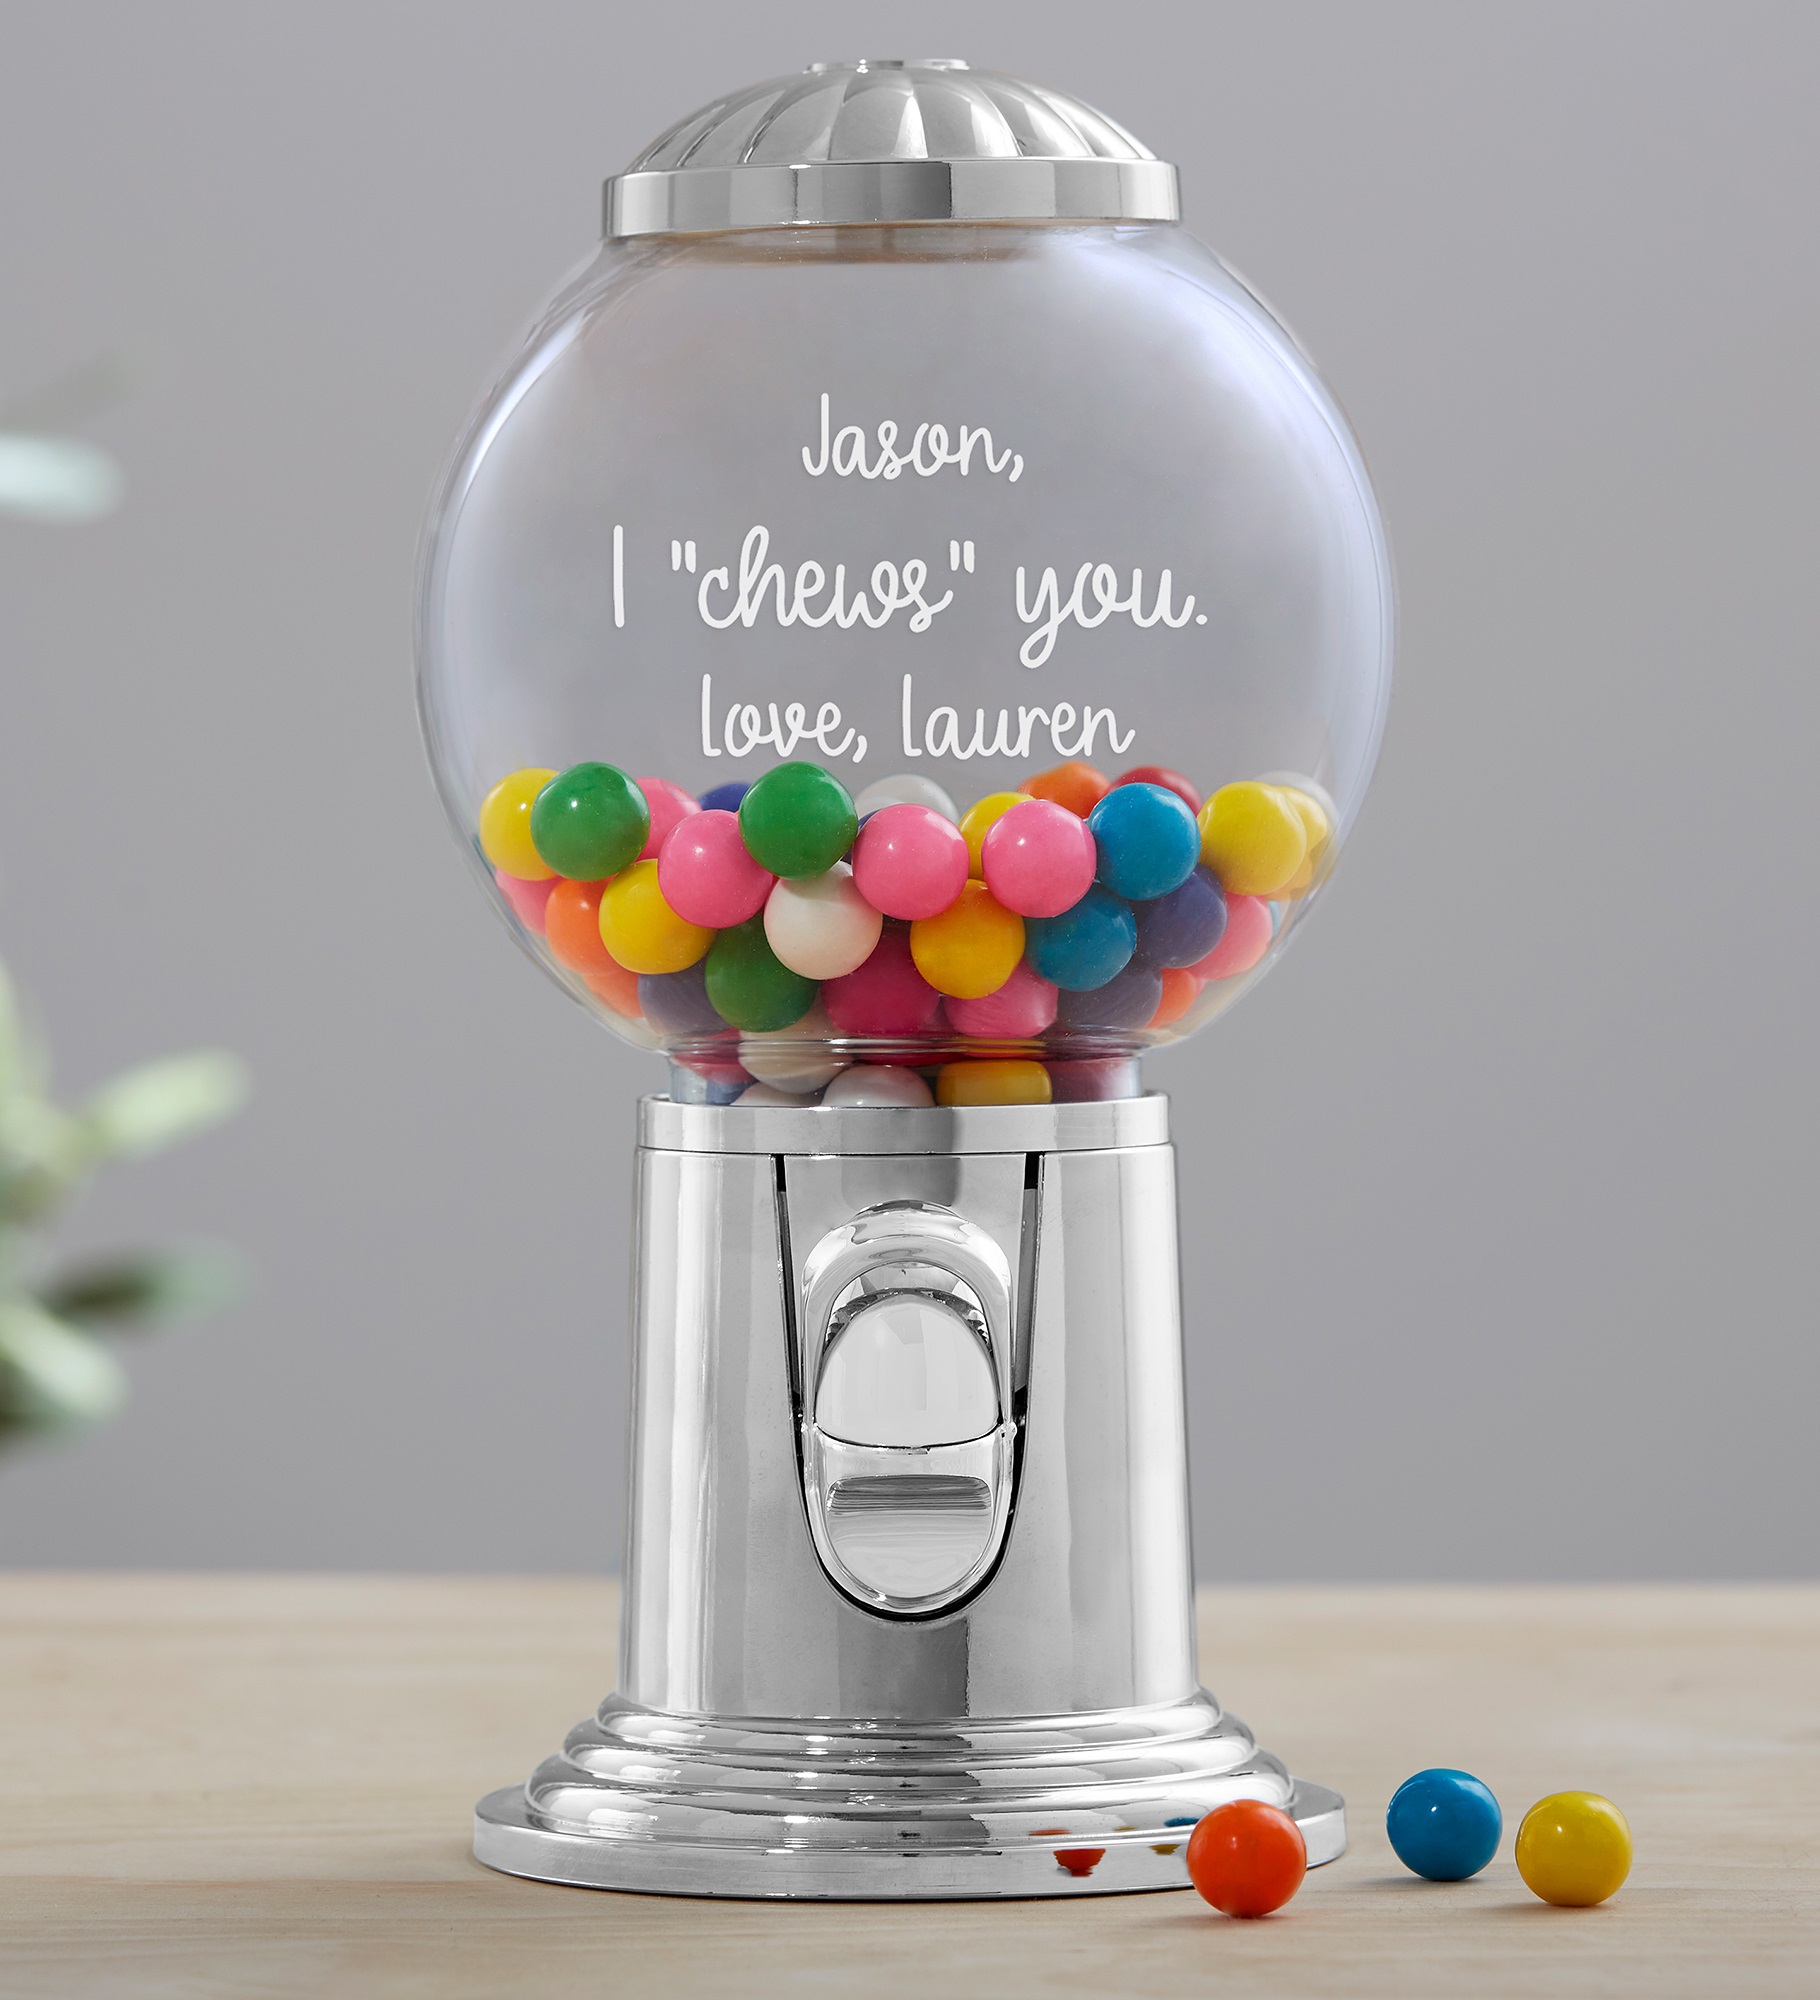 I Chews You Personalized Candy Dispenser